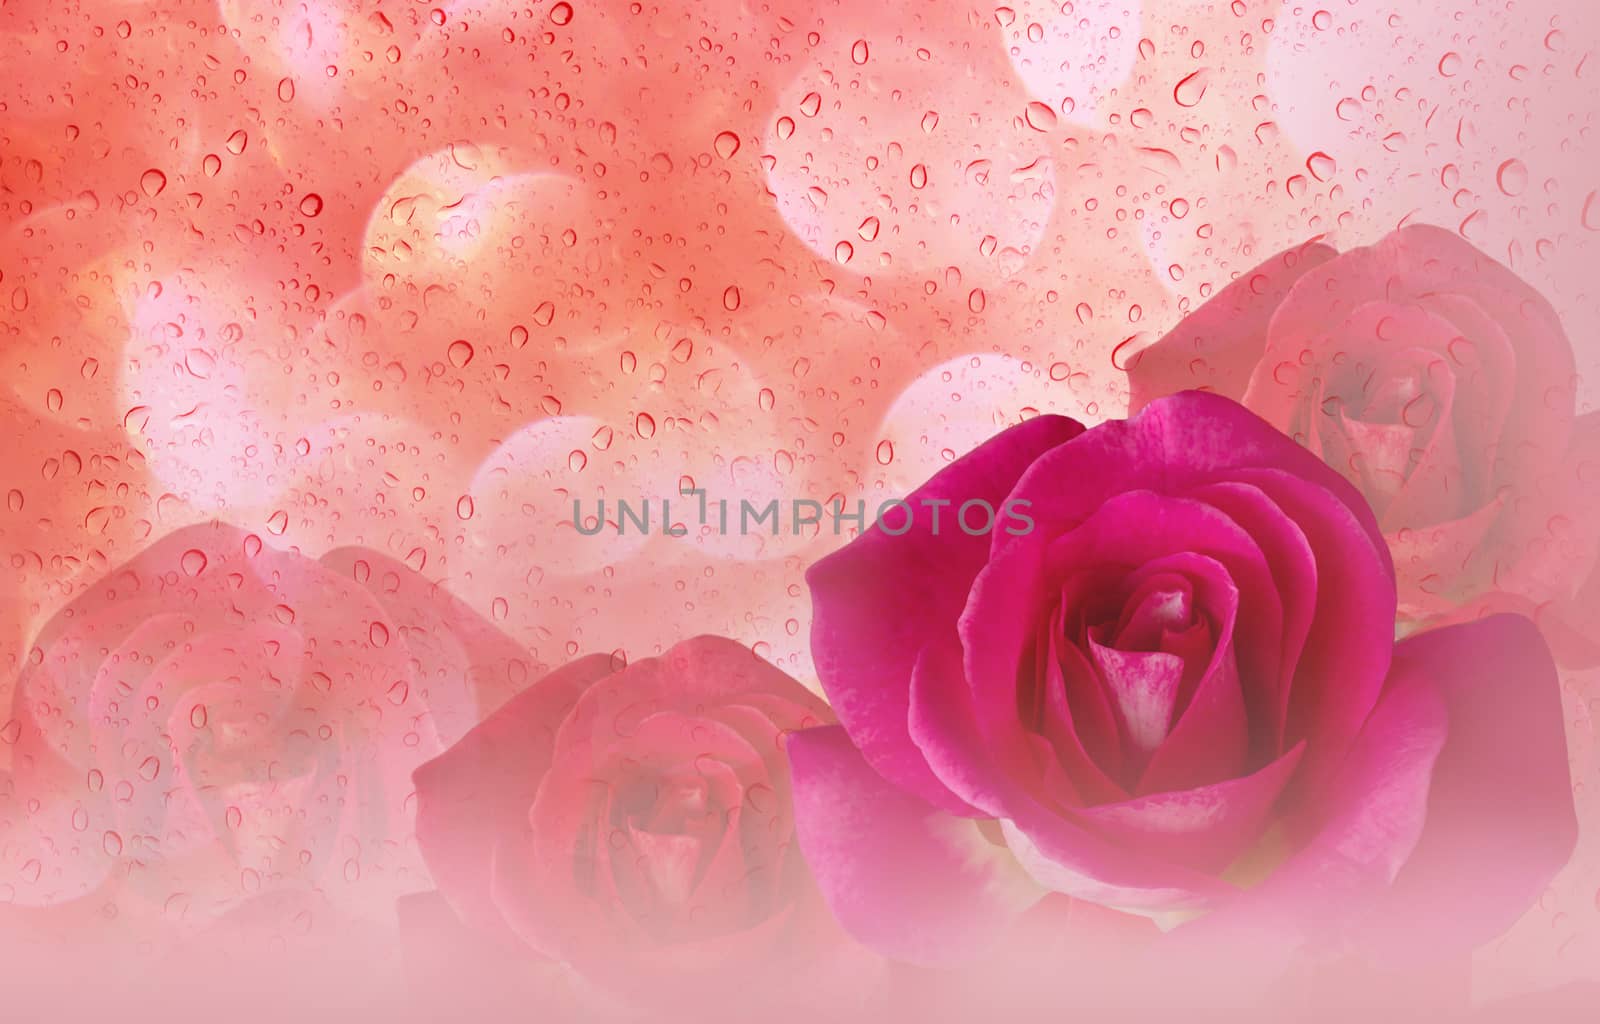 Romantic pink roses and water drop abstract orange pastel valentine background